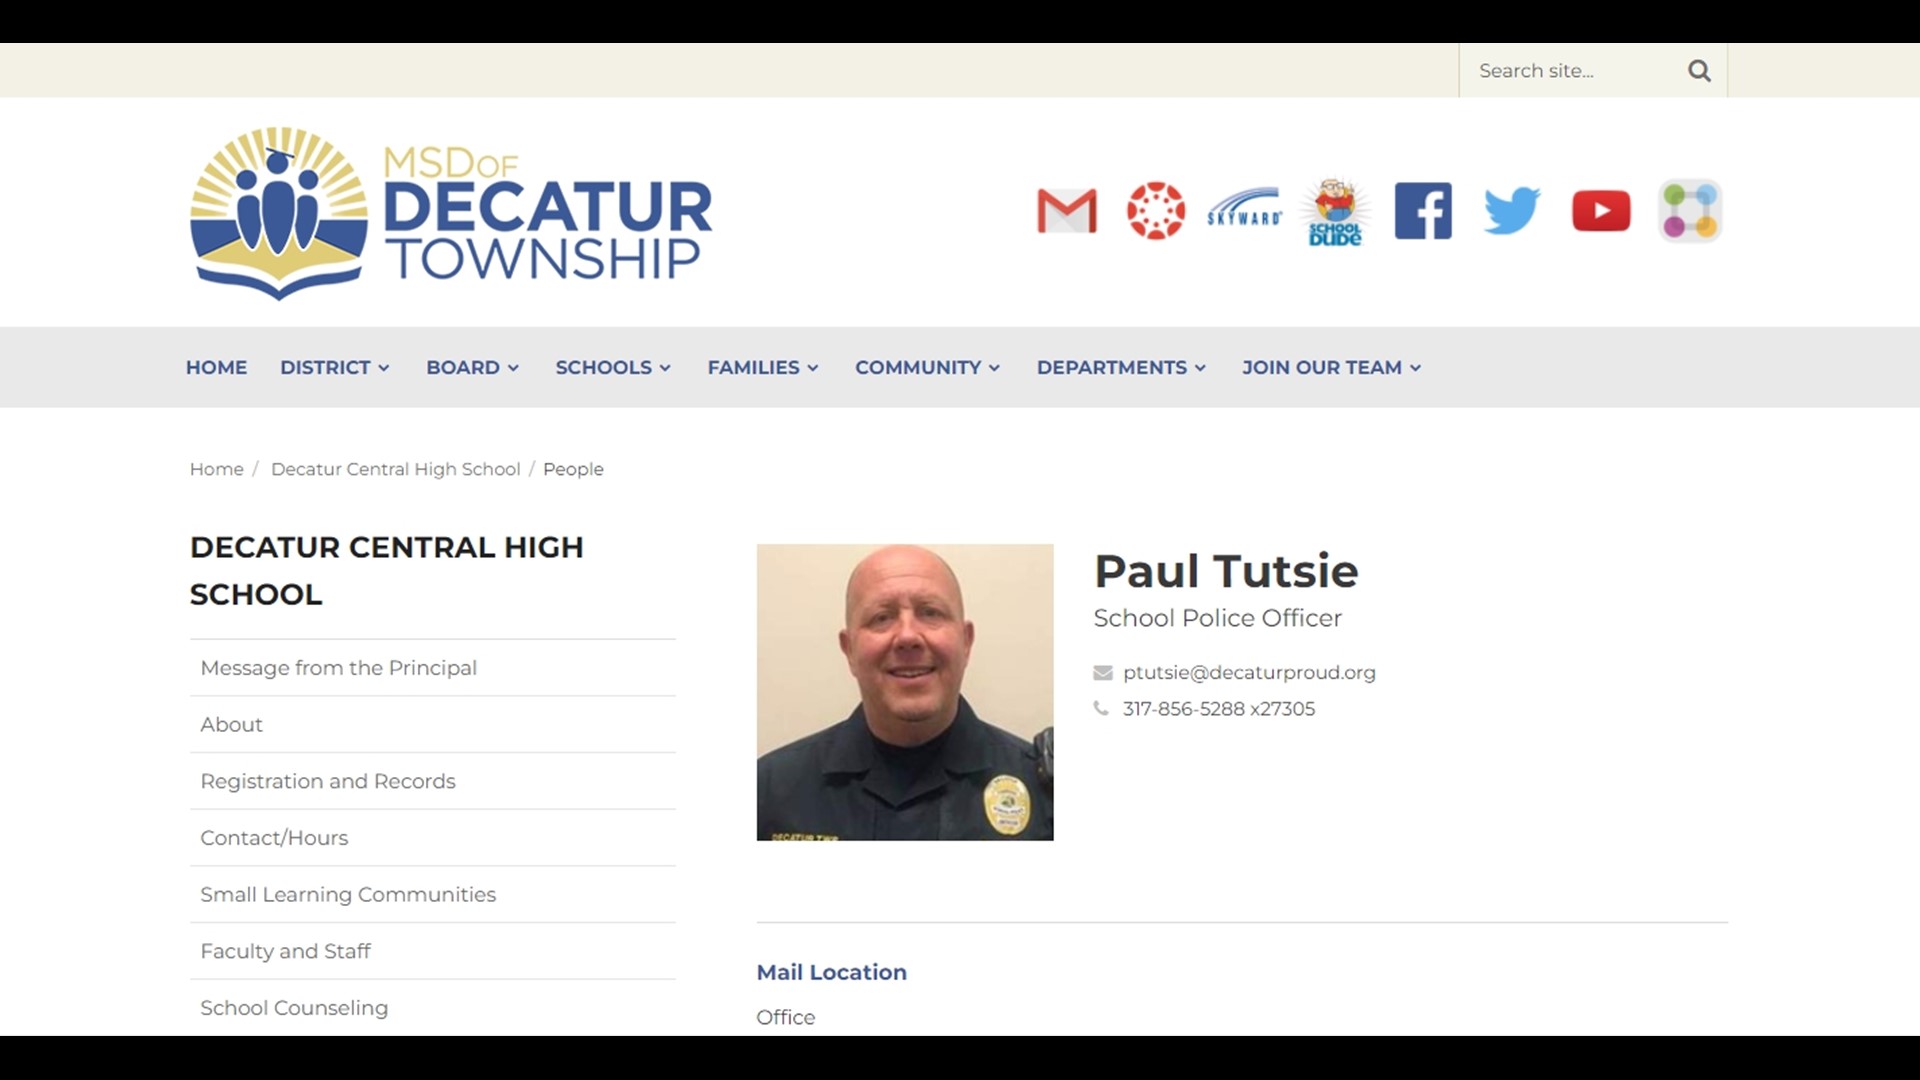 Decatur Township schools report they sent Officer Paul Tutsie a termination letter on March 1 after they investigated a complaint from a student.